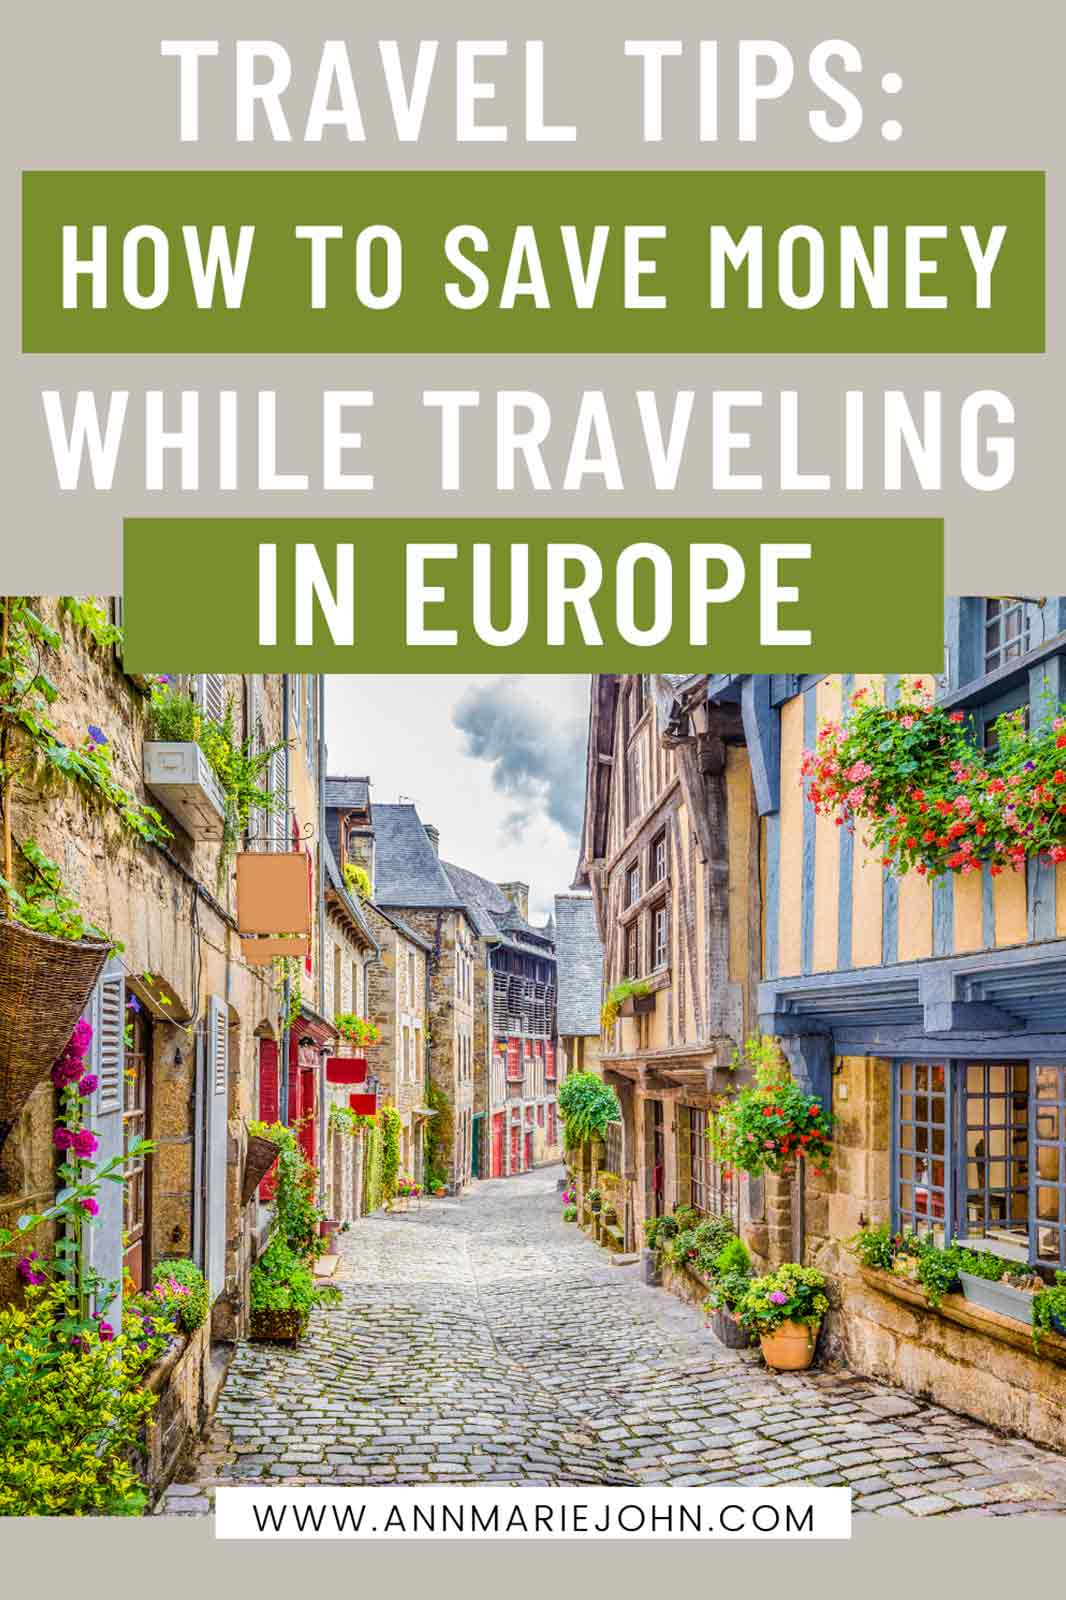 How to Save Money While Traveling in Europe